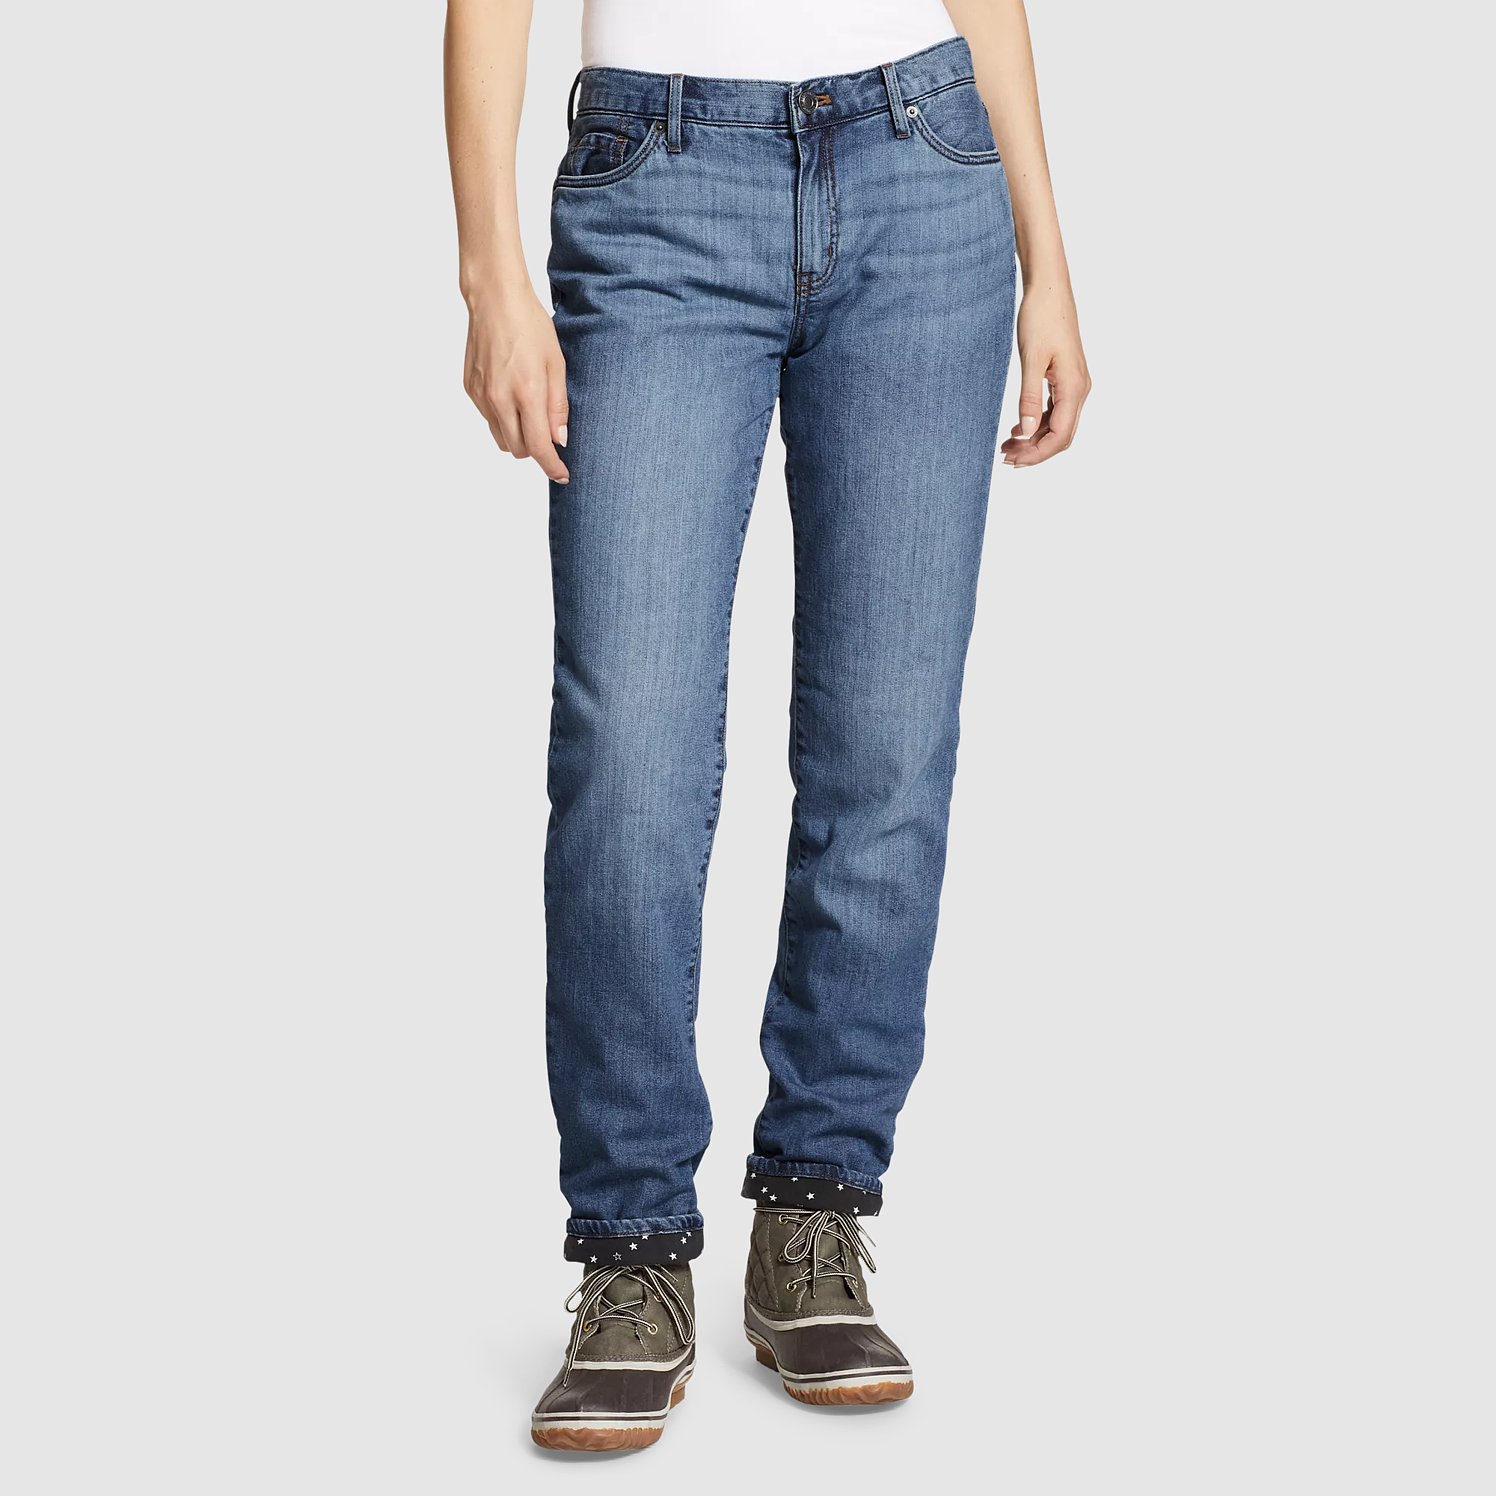 Womens Lined Jeans